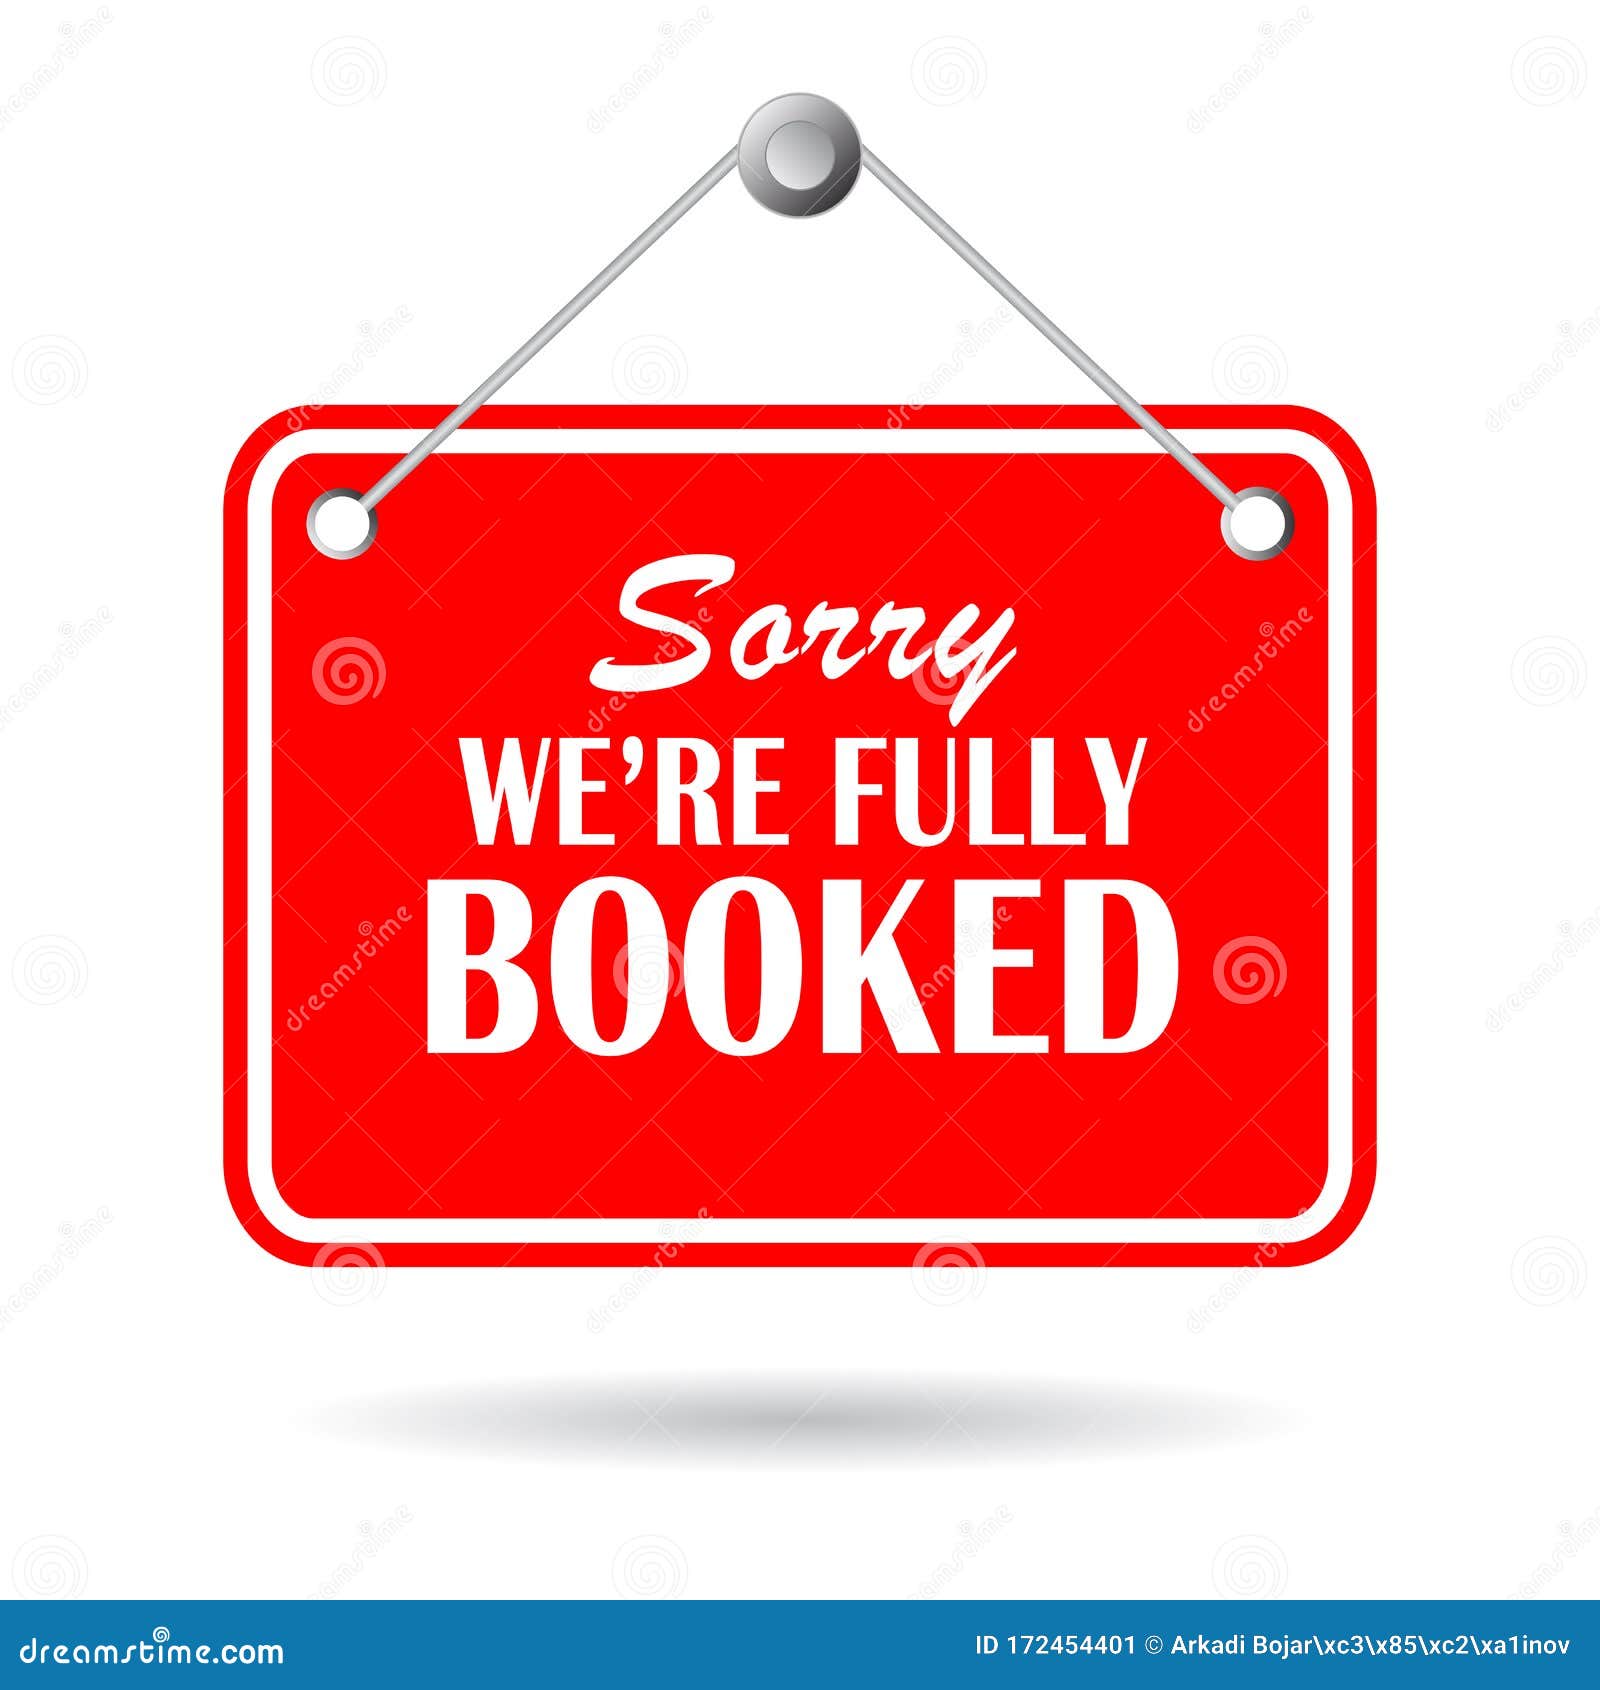 sorry we are fully booked sign